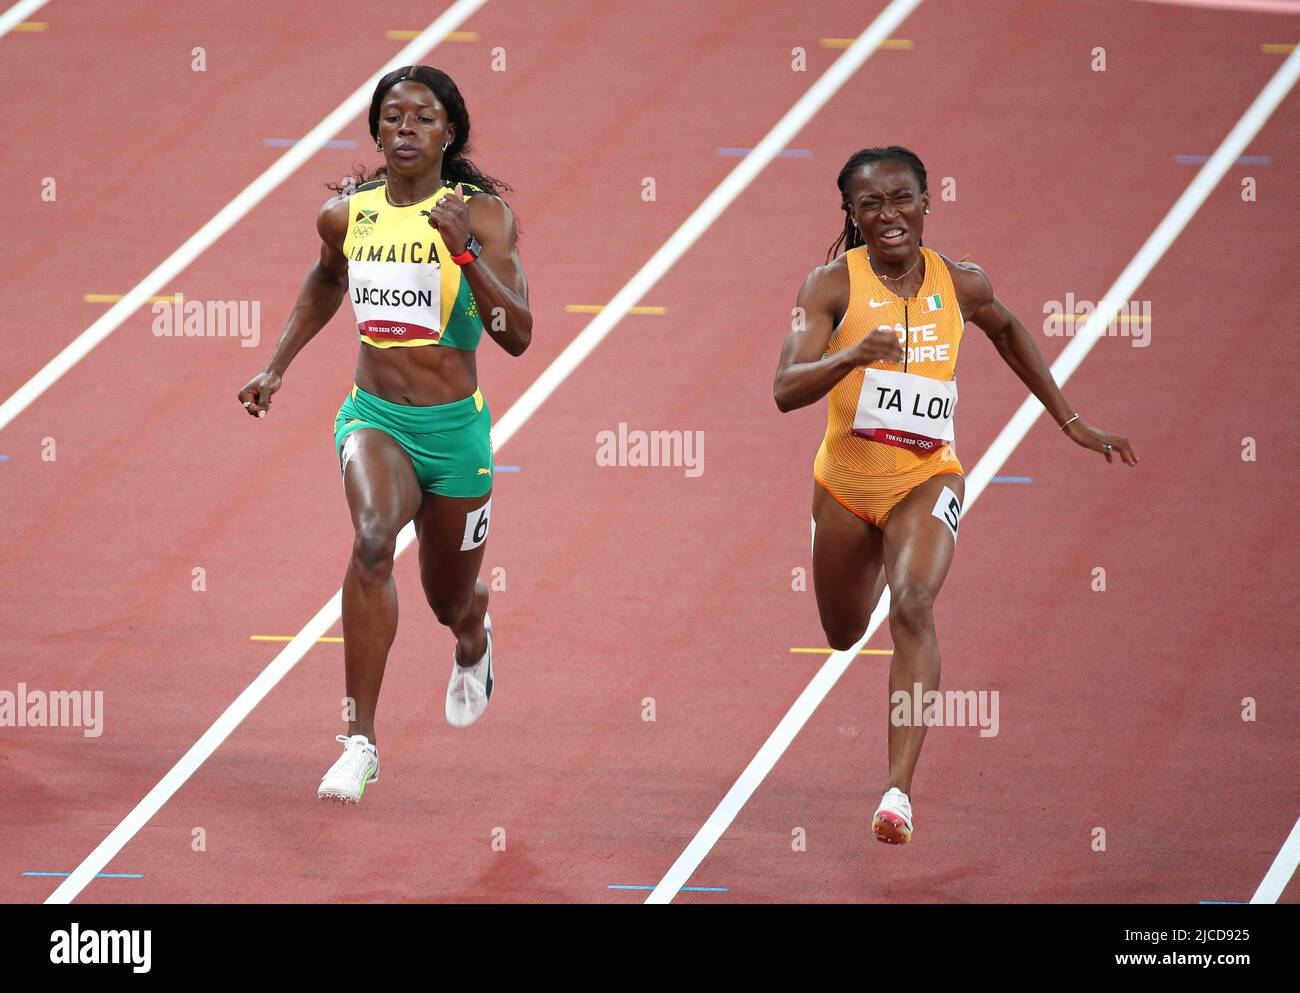 JULY 31st, 2021 - TOKYO, JAPAN: Shericka Jackson of Jamaica and Marie-Josee Ta Lou of Ivory Coast in action during the Women's 100m Semi-Finals at the Stock Photo